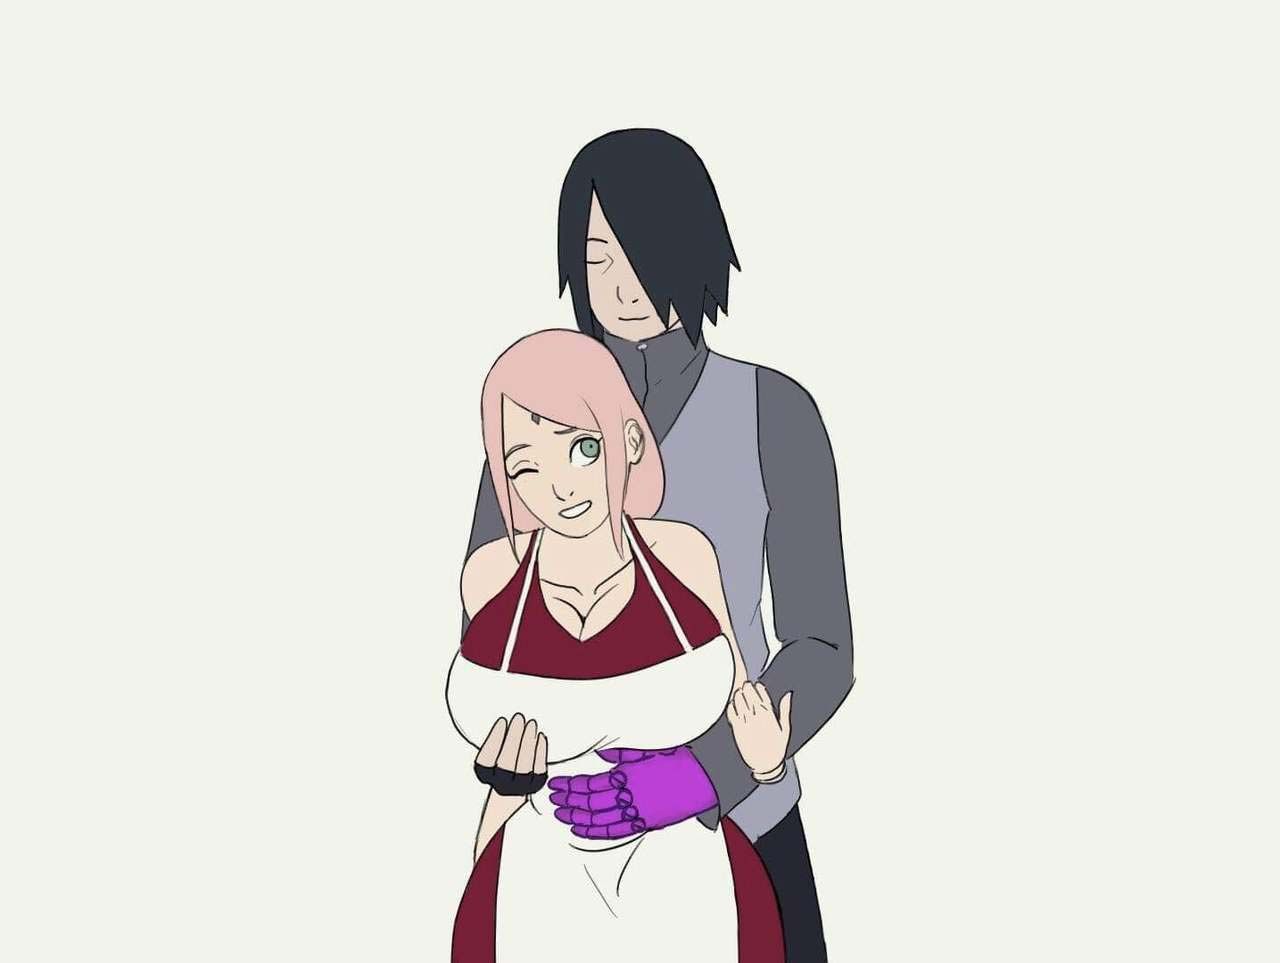 Adult-fanfiction.org : Naruto